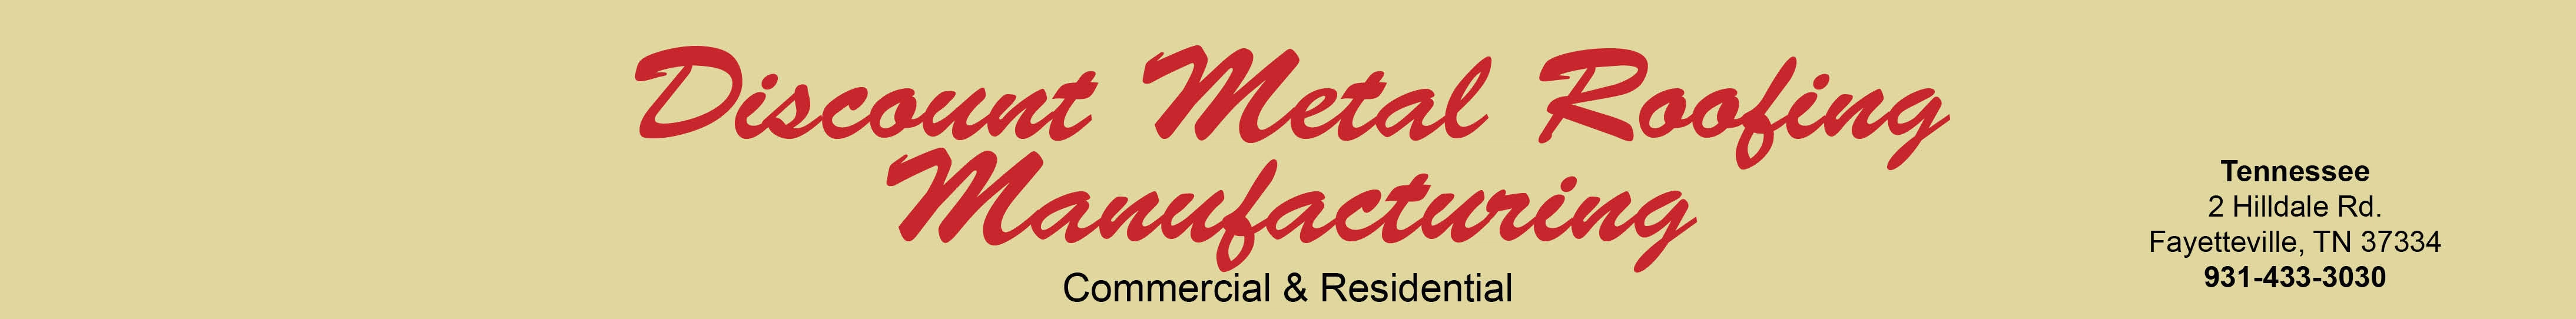 Discount Metal Roofing & Sdng Logo